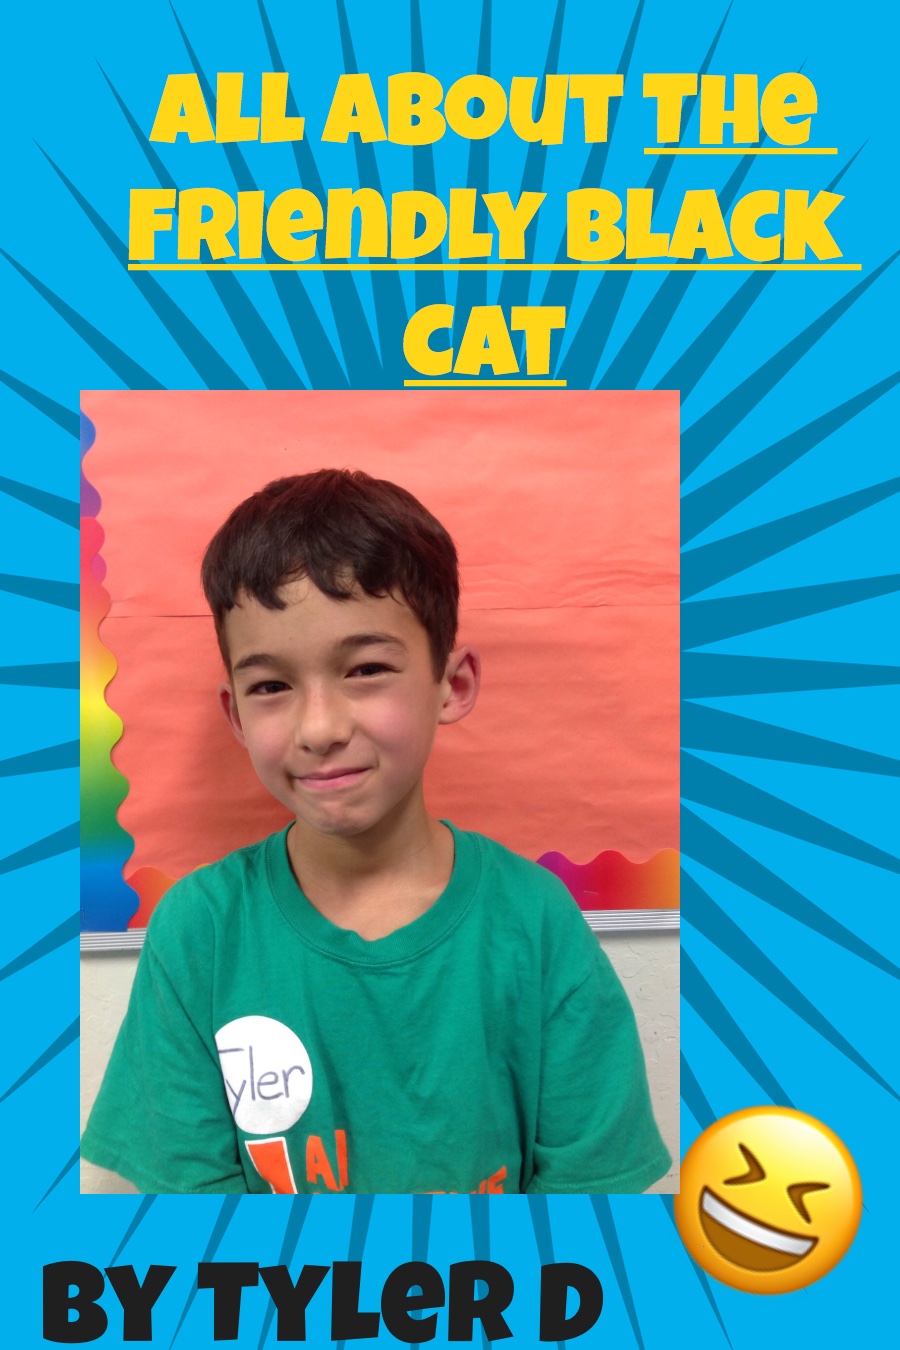 All About The Friendly Black Cat by Tyler D